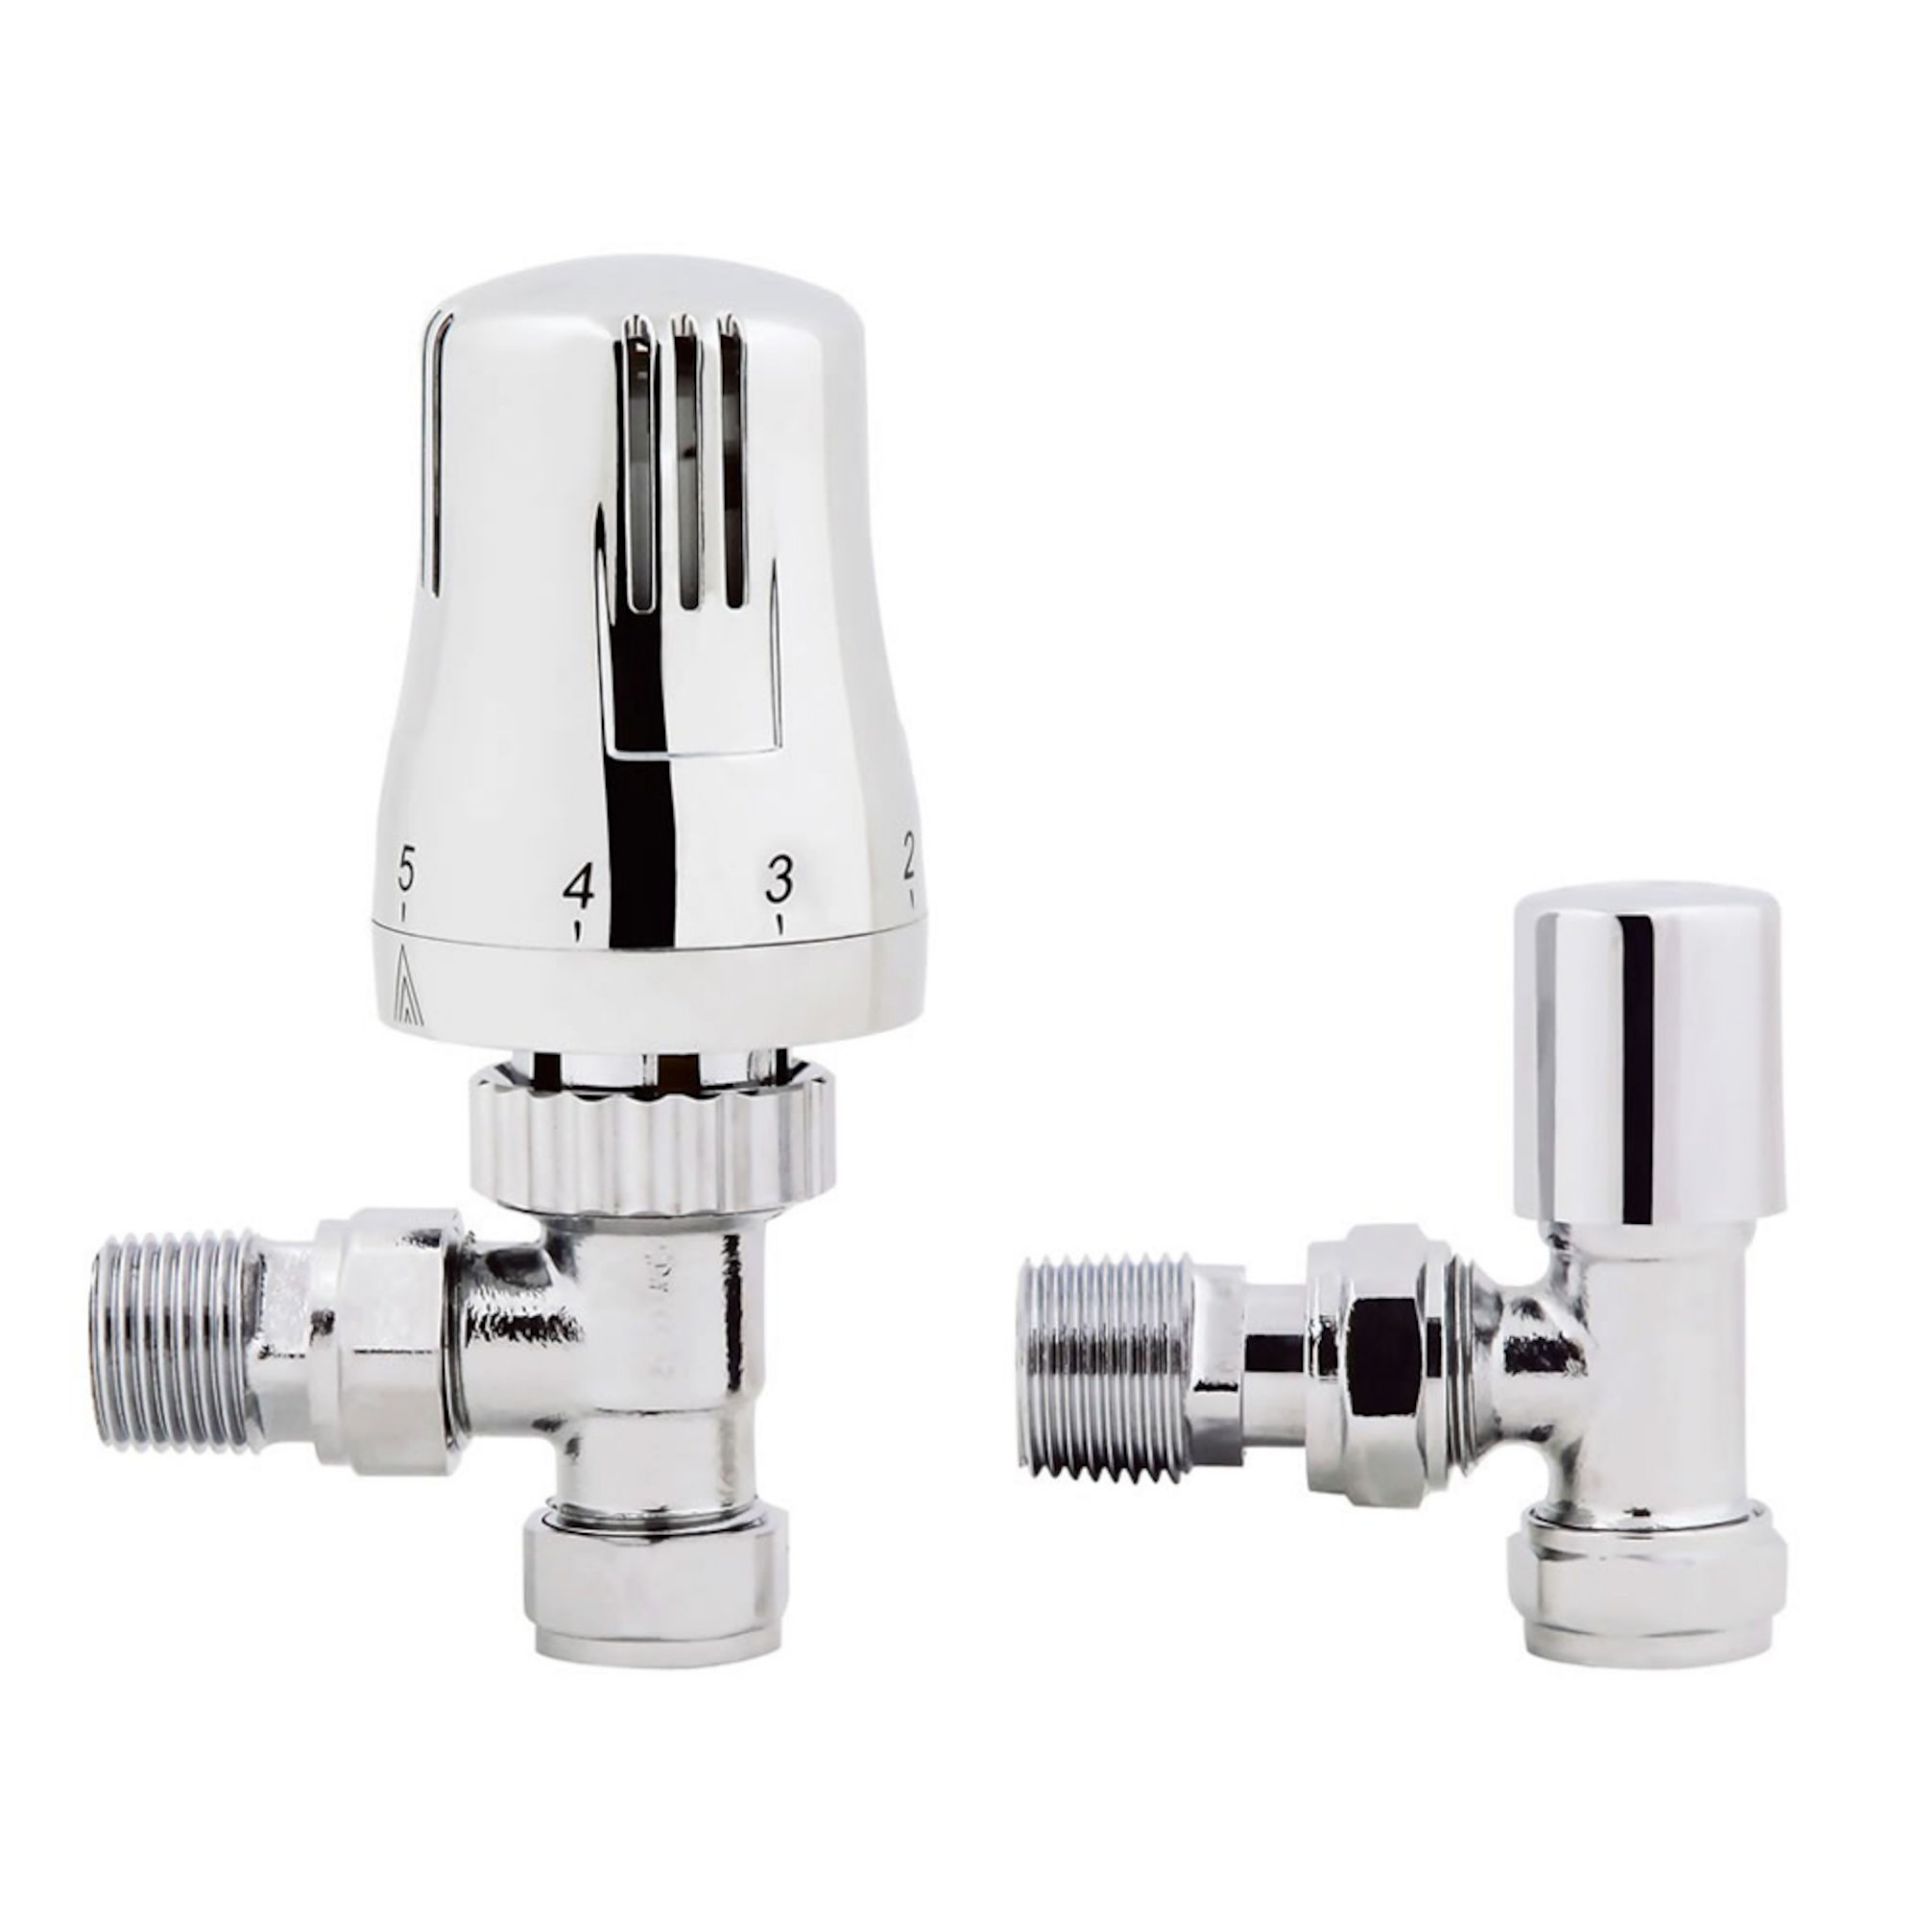 (CP92) 15mm Standard Connection Thermostatic Angled Chrome Radiator Valves Chrome Plated Solid Brass